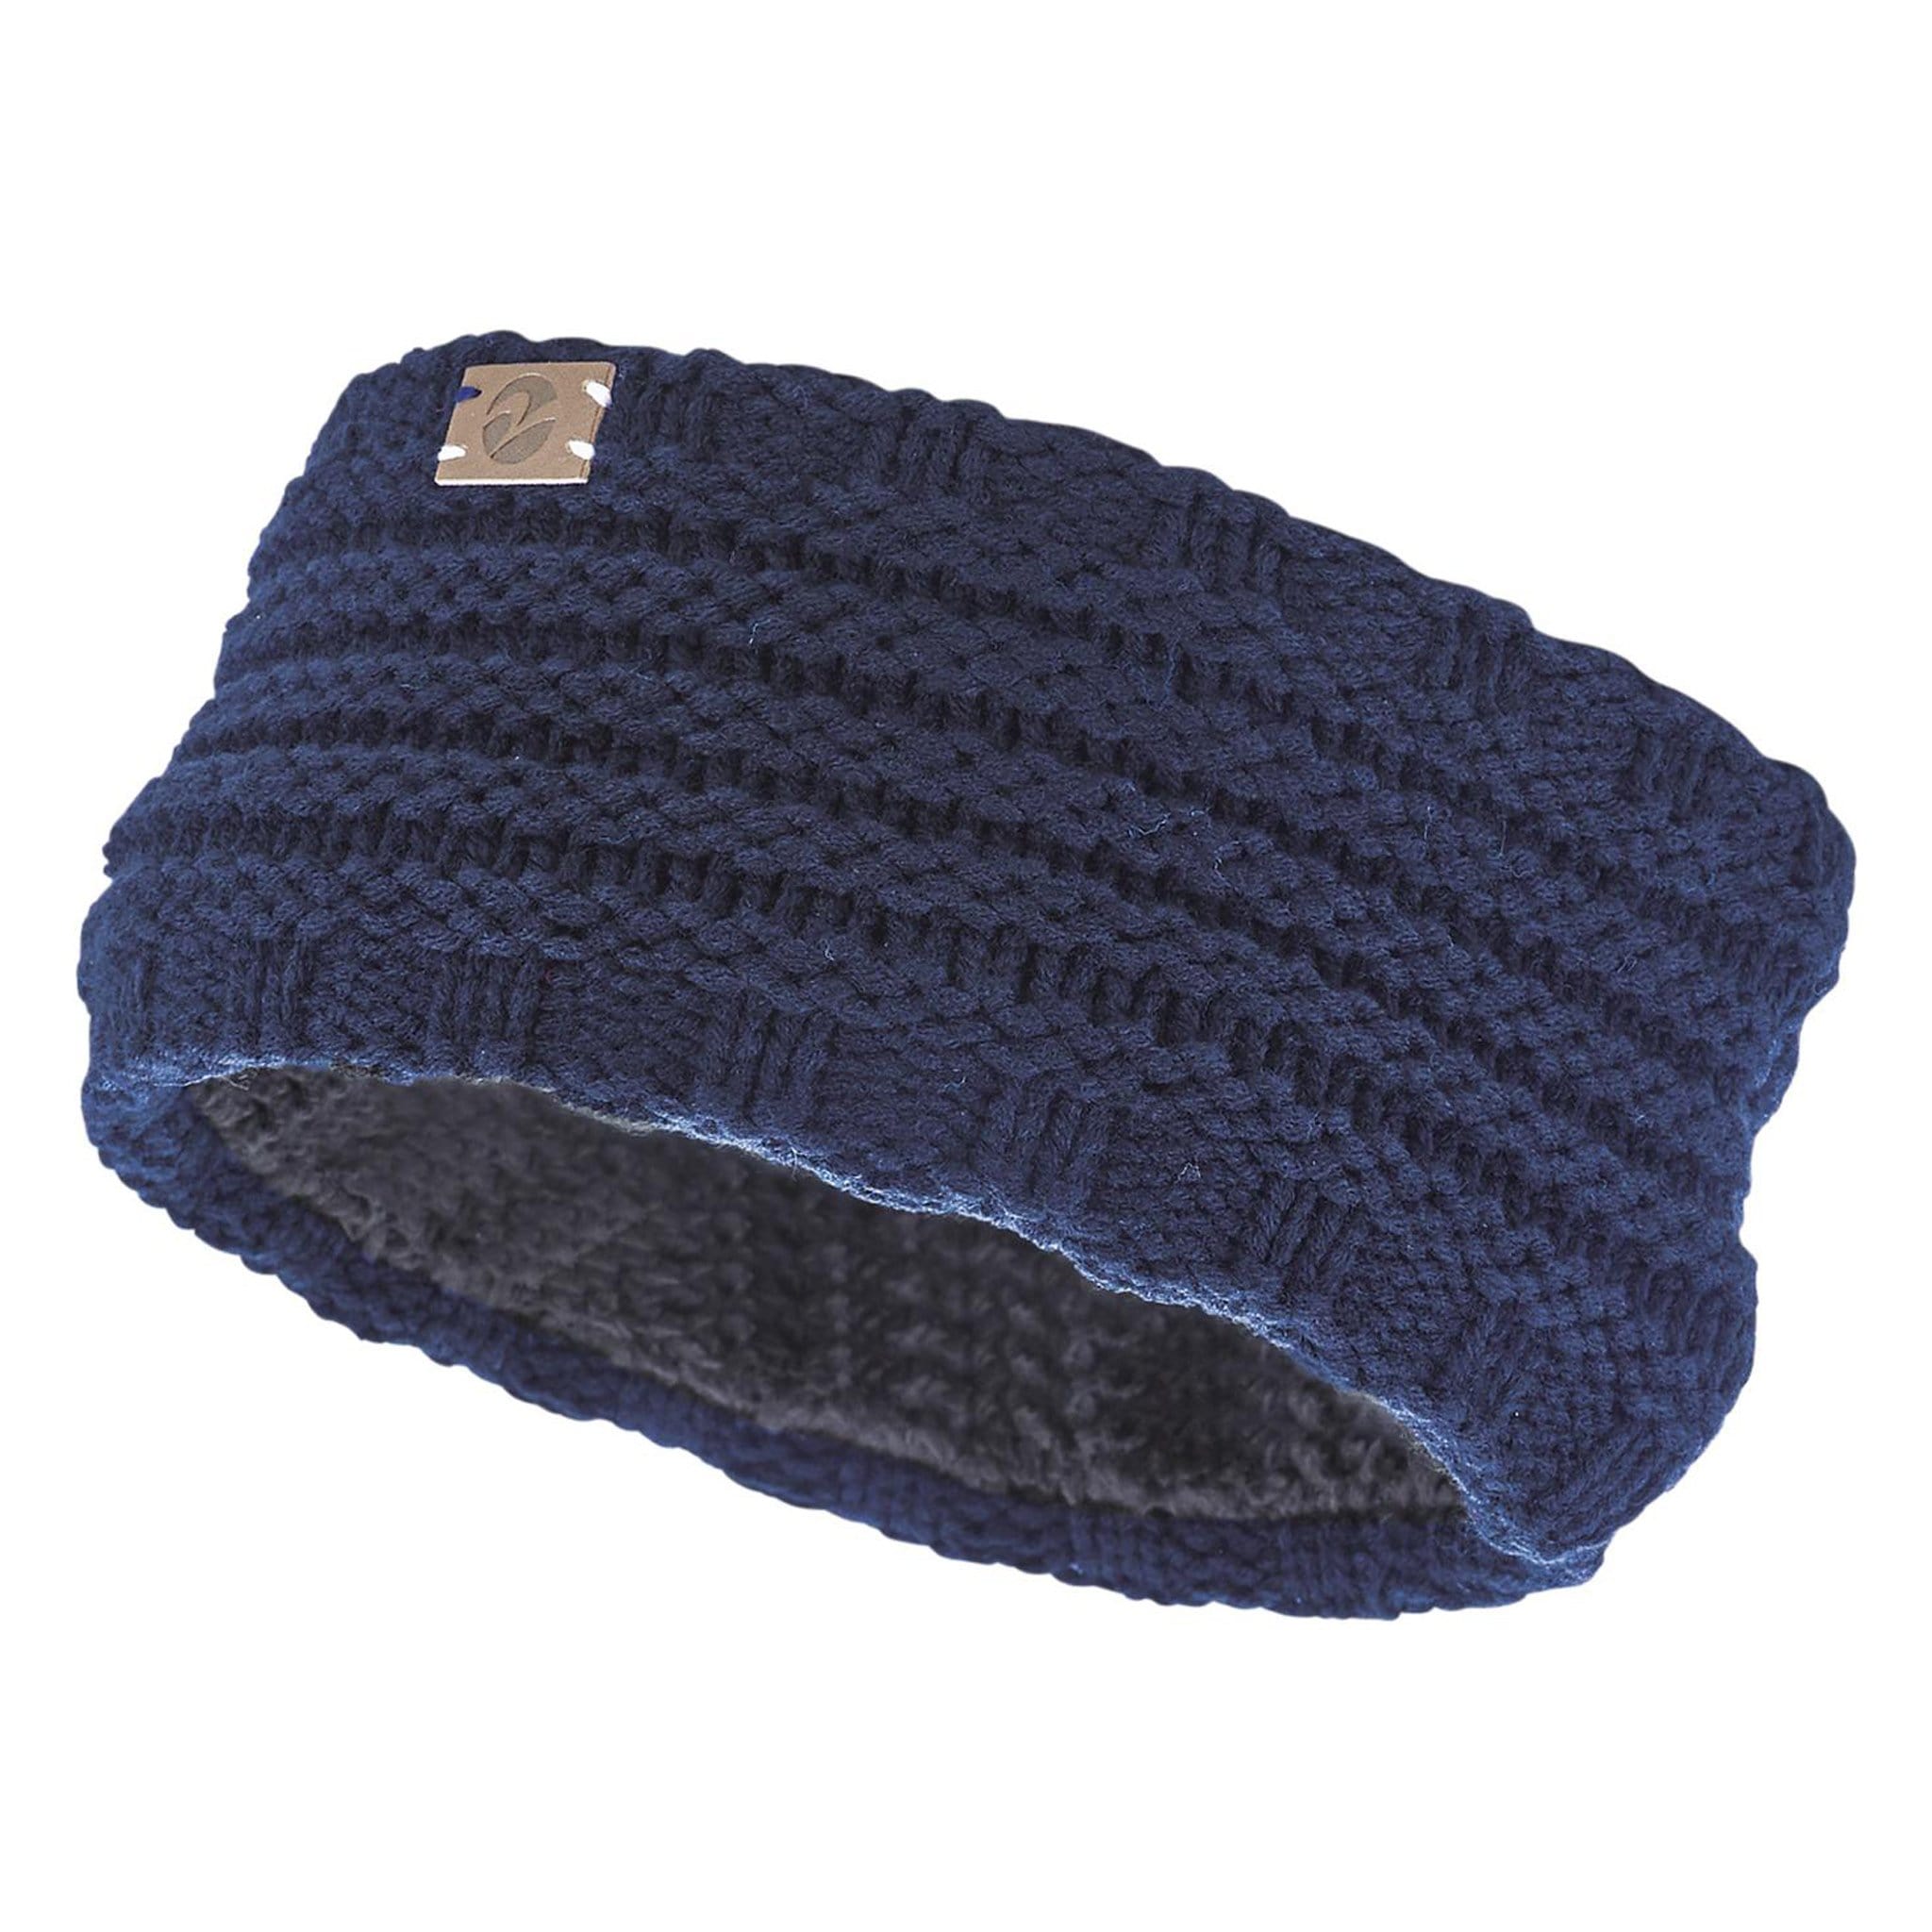 Busse Knitted Headband in Navy 719338